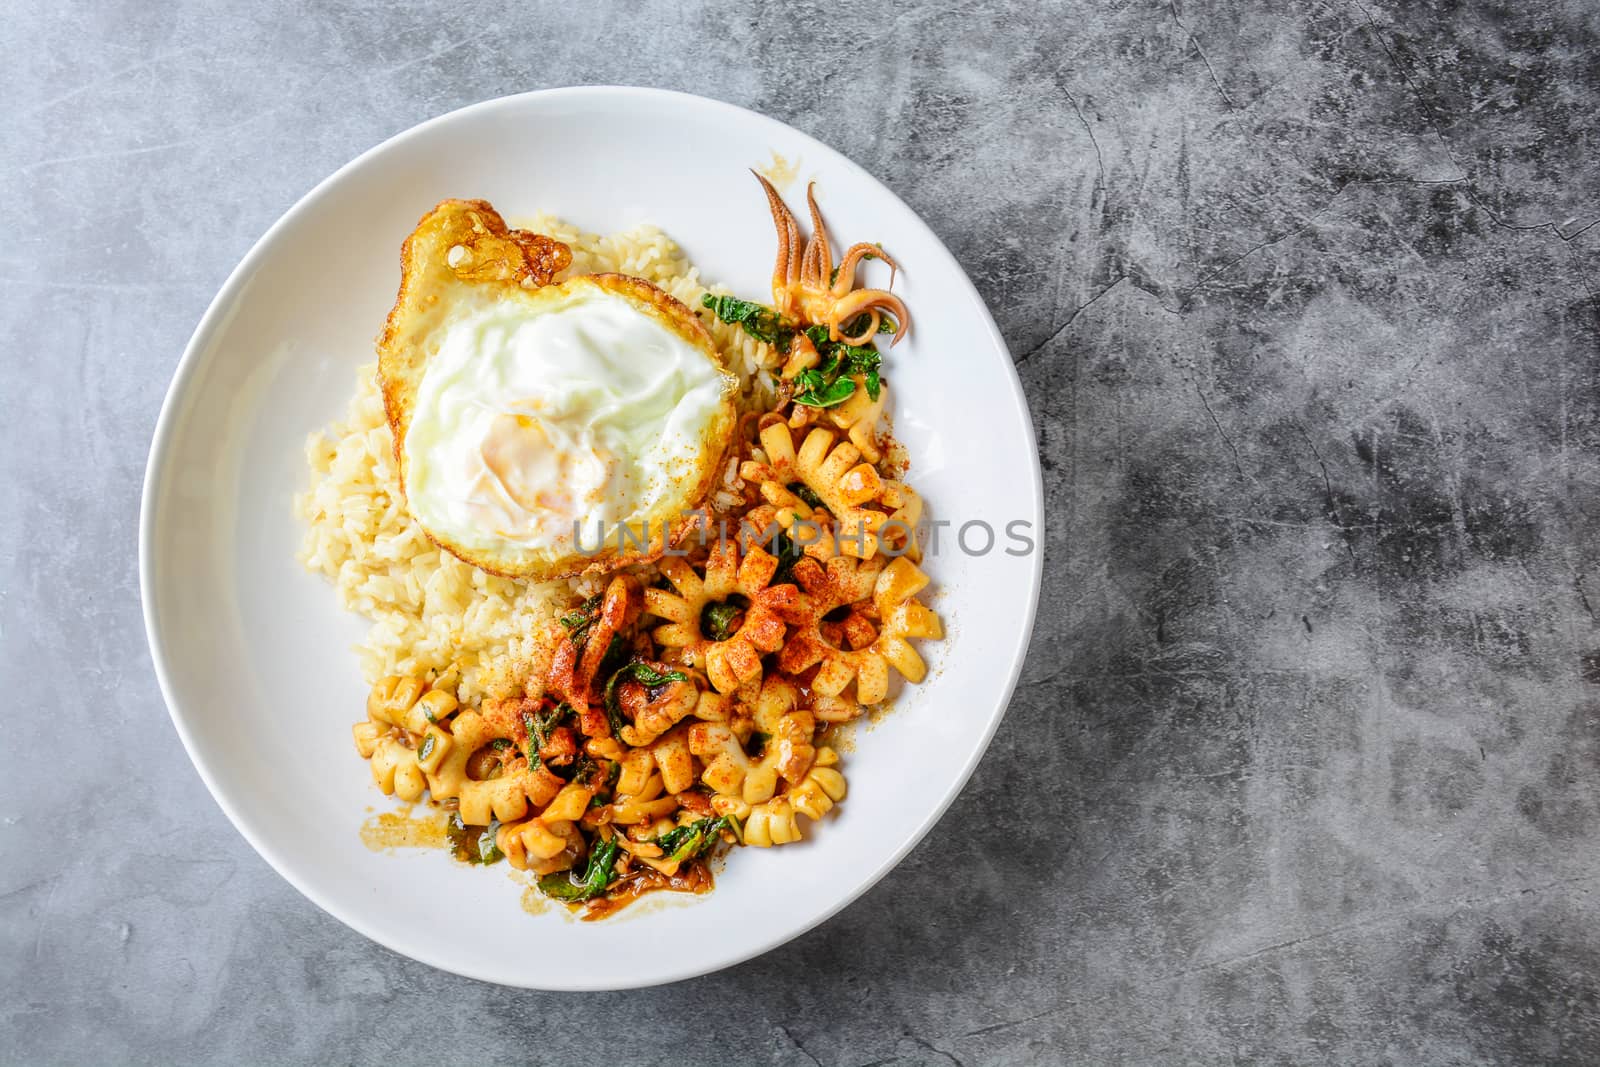 Spicy stir fried squid with basil leaves and chili, Sunny side up egg, served with brown rice. Hot and spicy dish.